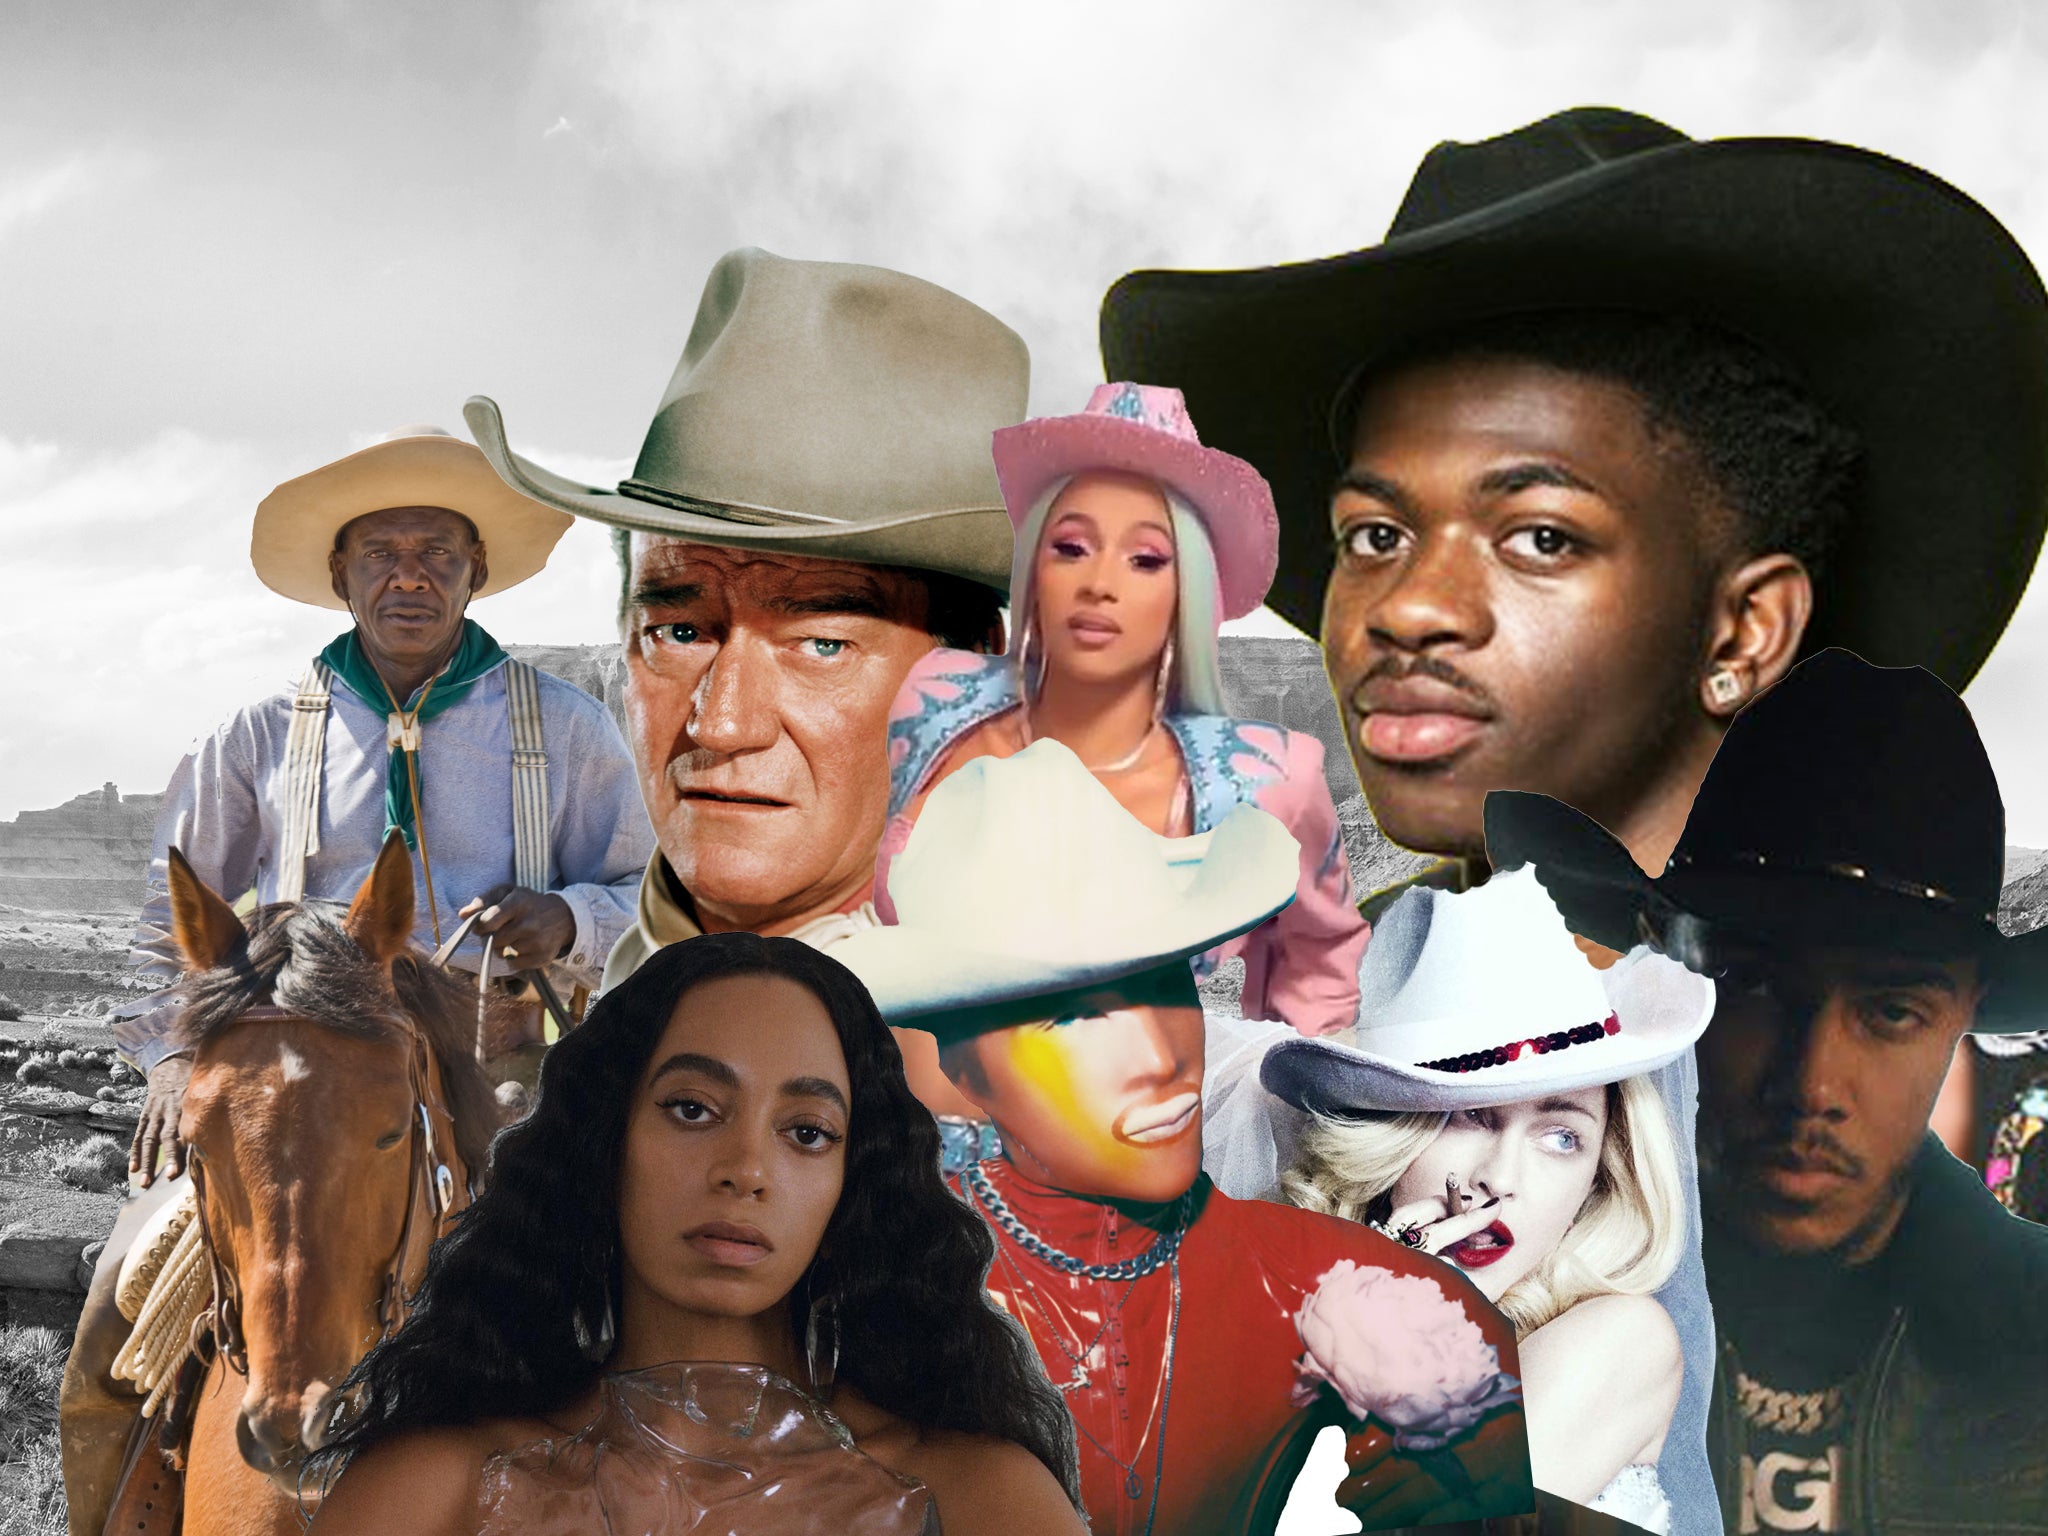 Return of the cowboy: How musicians in 2019 are rewriting an American ...